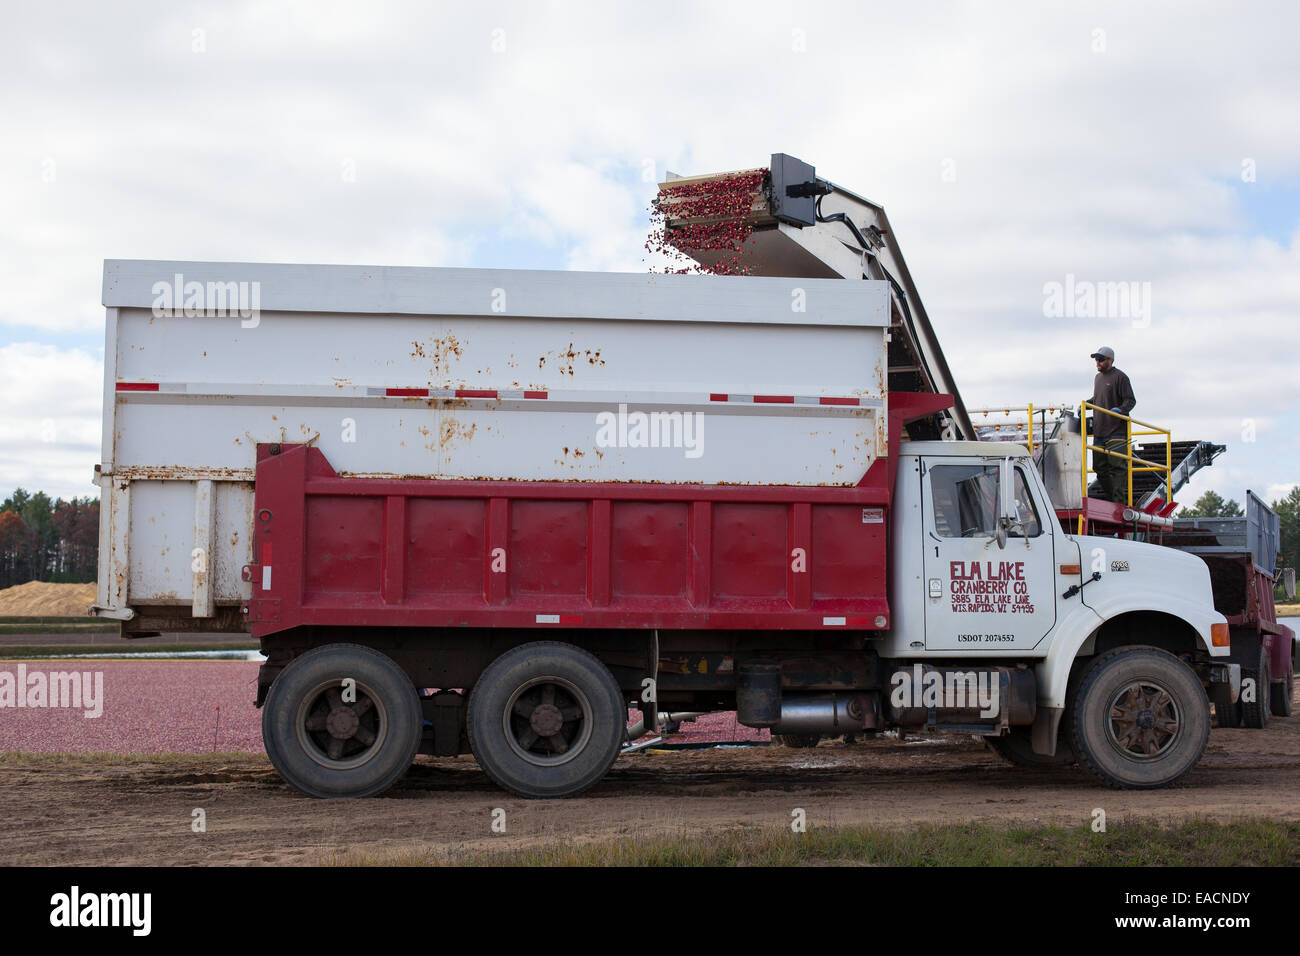 Cranberries being loaded onto a dump truck from a flooded cranberry field Stock Photo